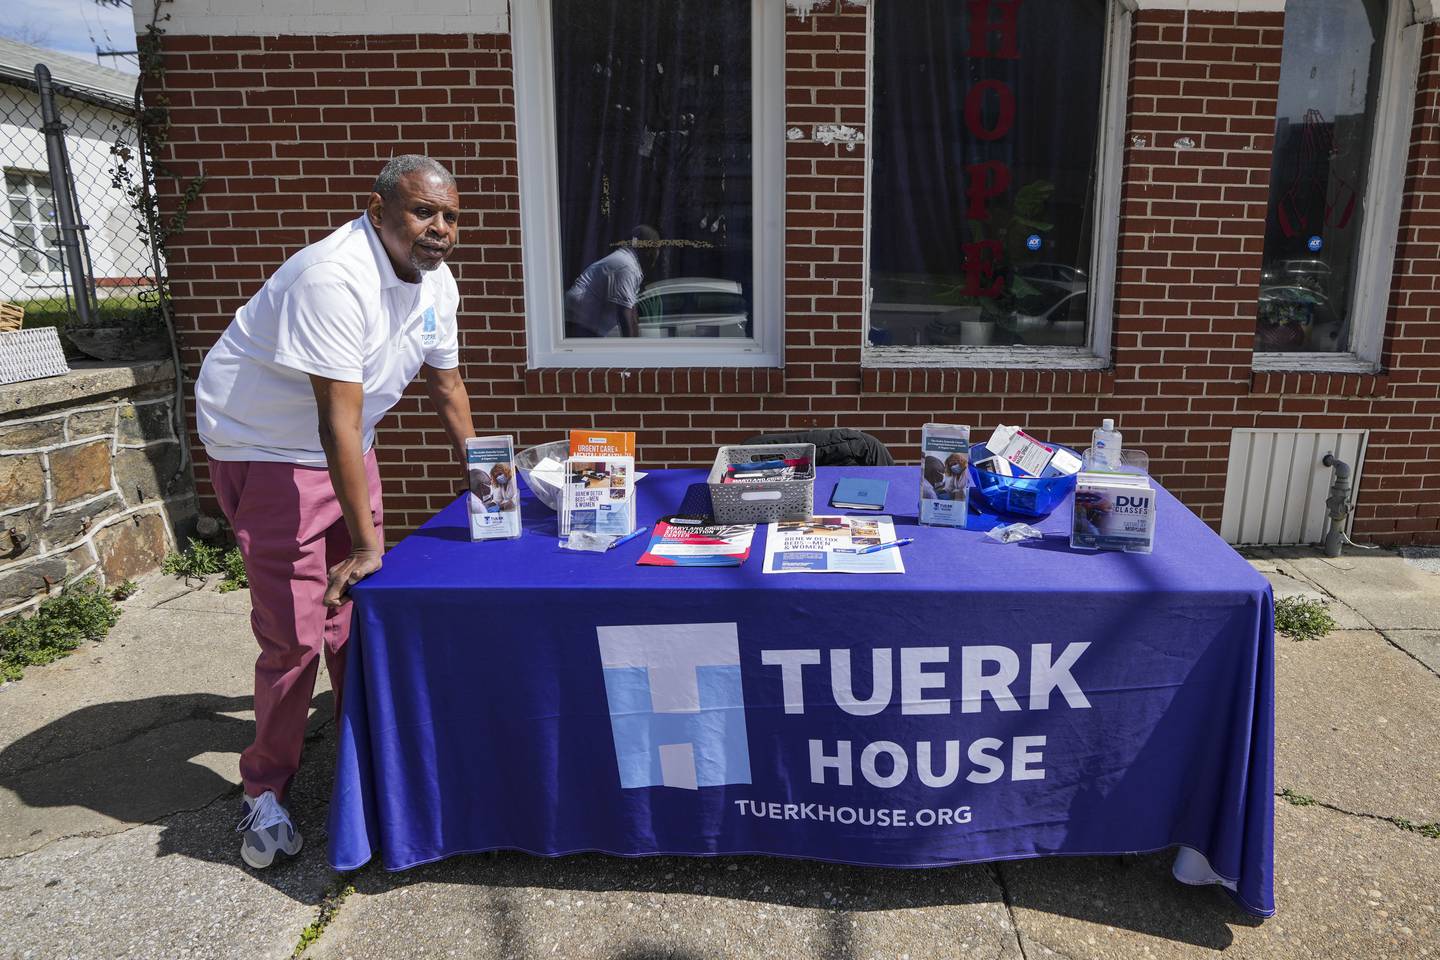 At Poplar Grove Street and West Lafayette Avenue, as the lone outreach specialist of Tuerk House, Vincent Timmons, provides information to help people battling addiction in Baltimore, MD., on March 21, 2023. He loves to help people and give them options to overcome their addictions or use other resources from the organization.